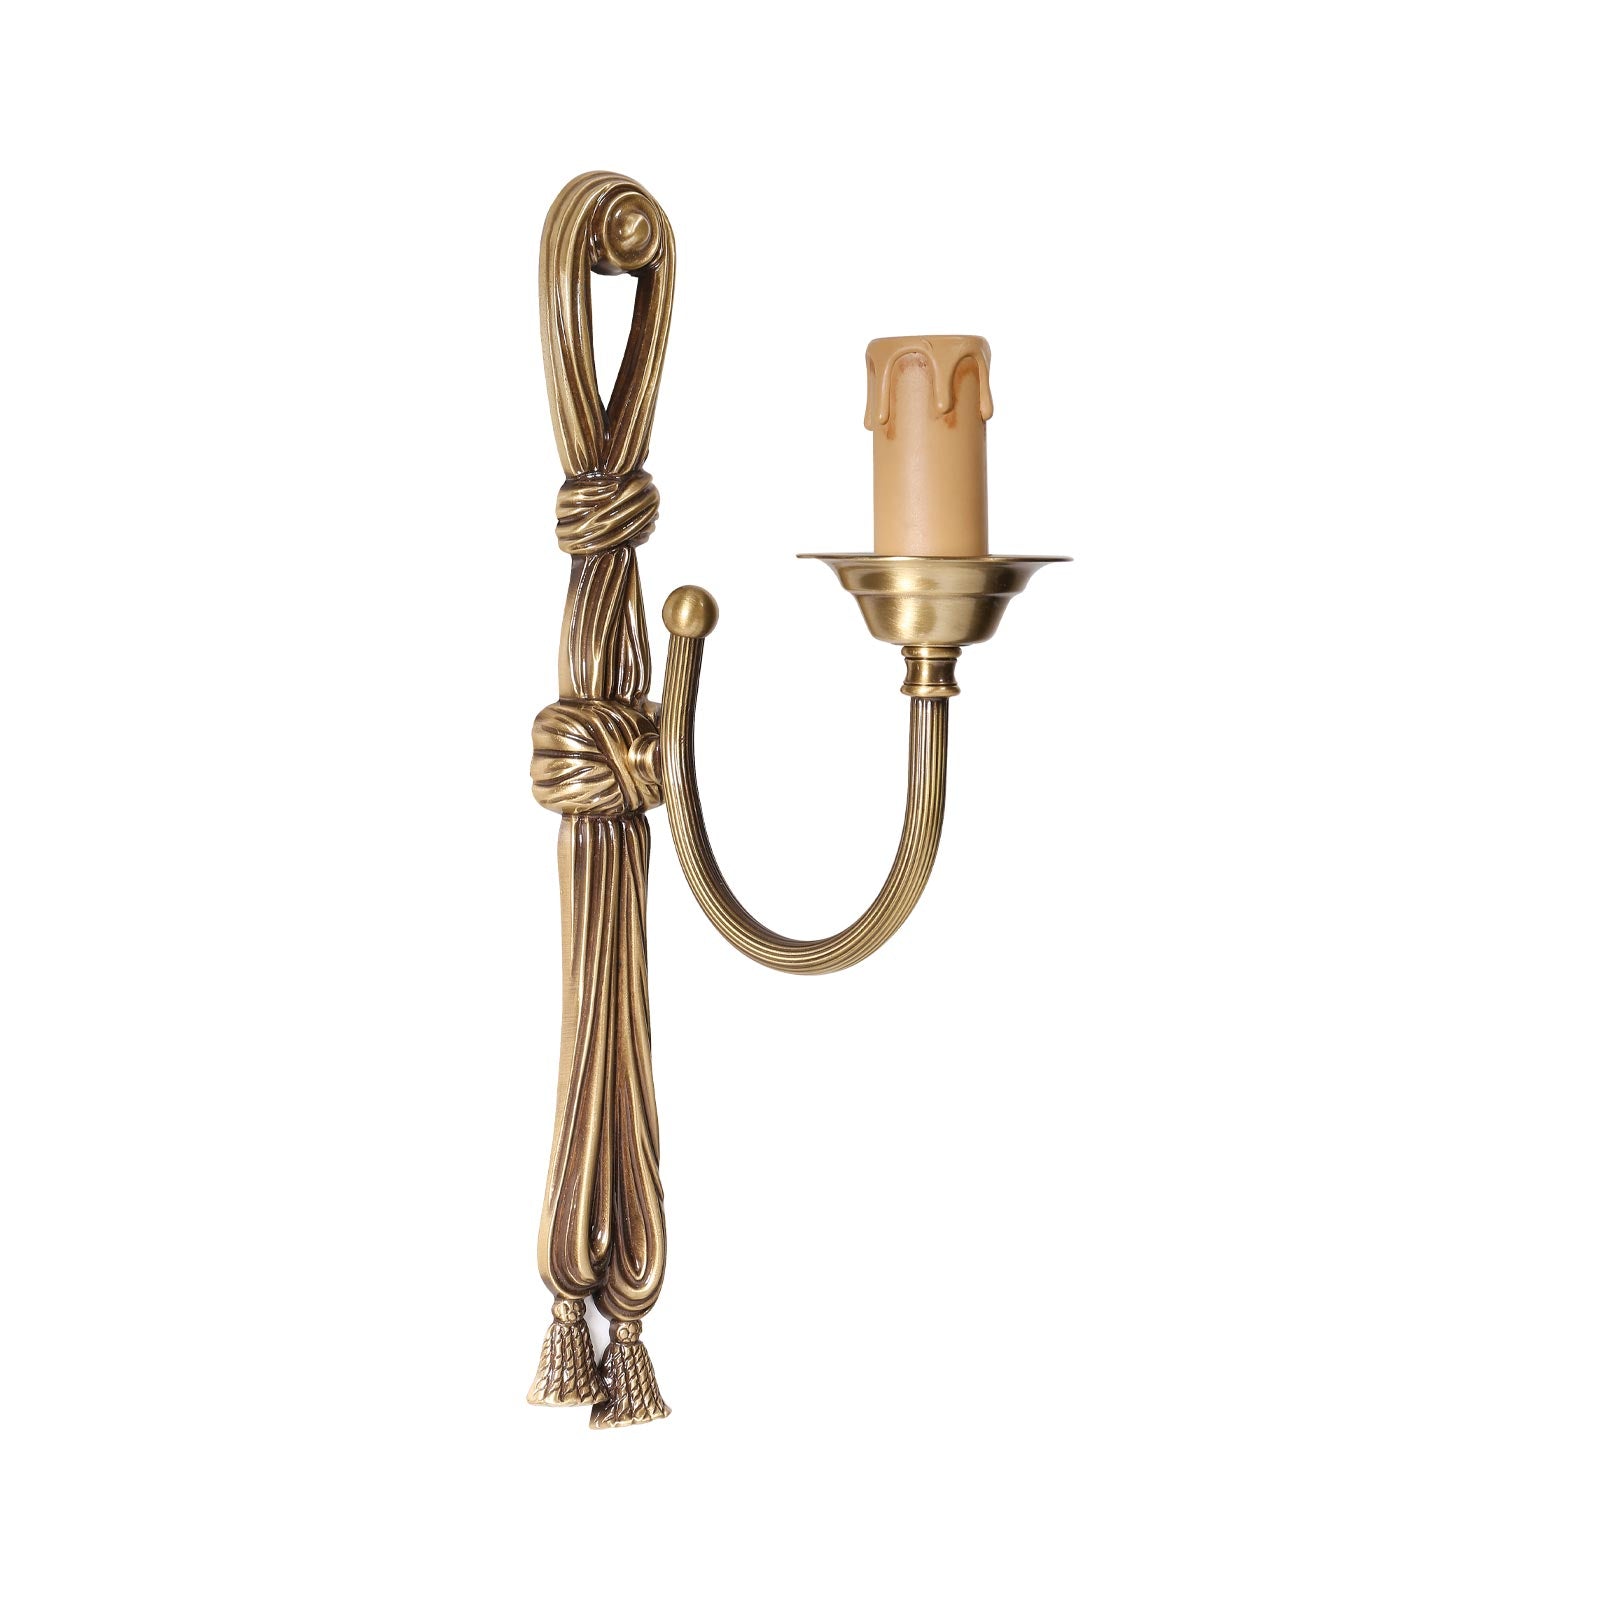 Antique Brass Candle Sconce, Brass Candle Laterns